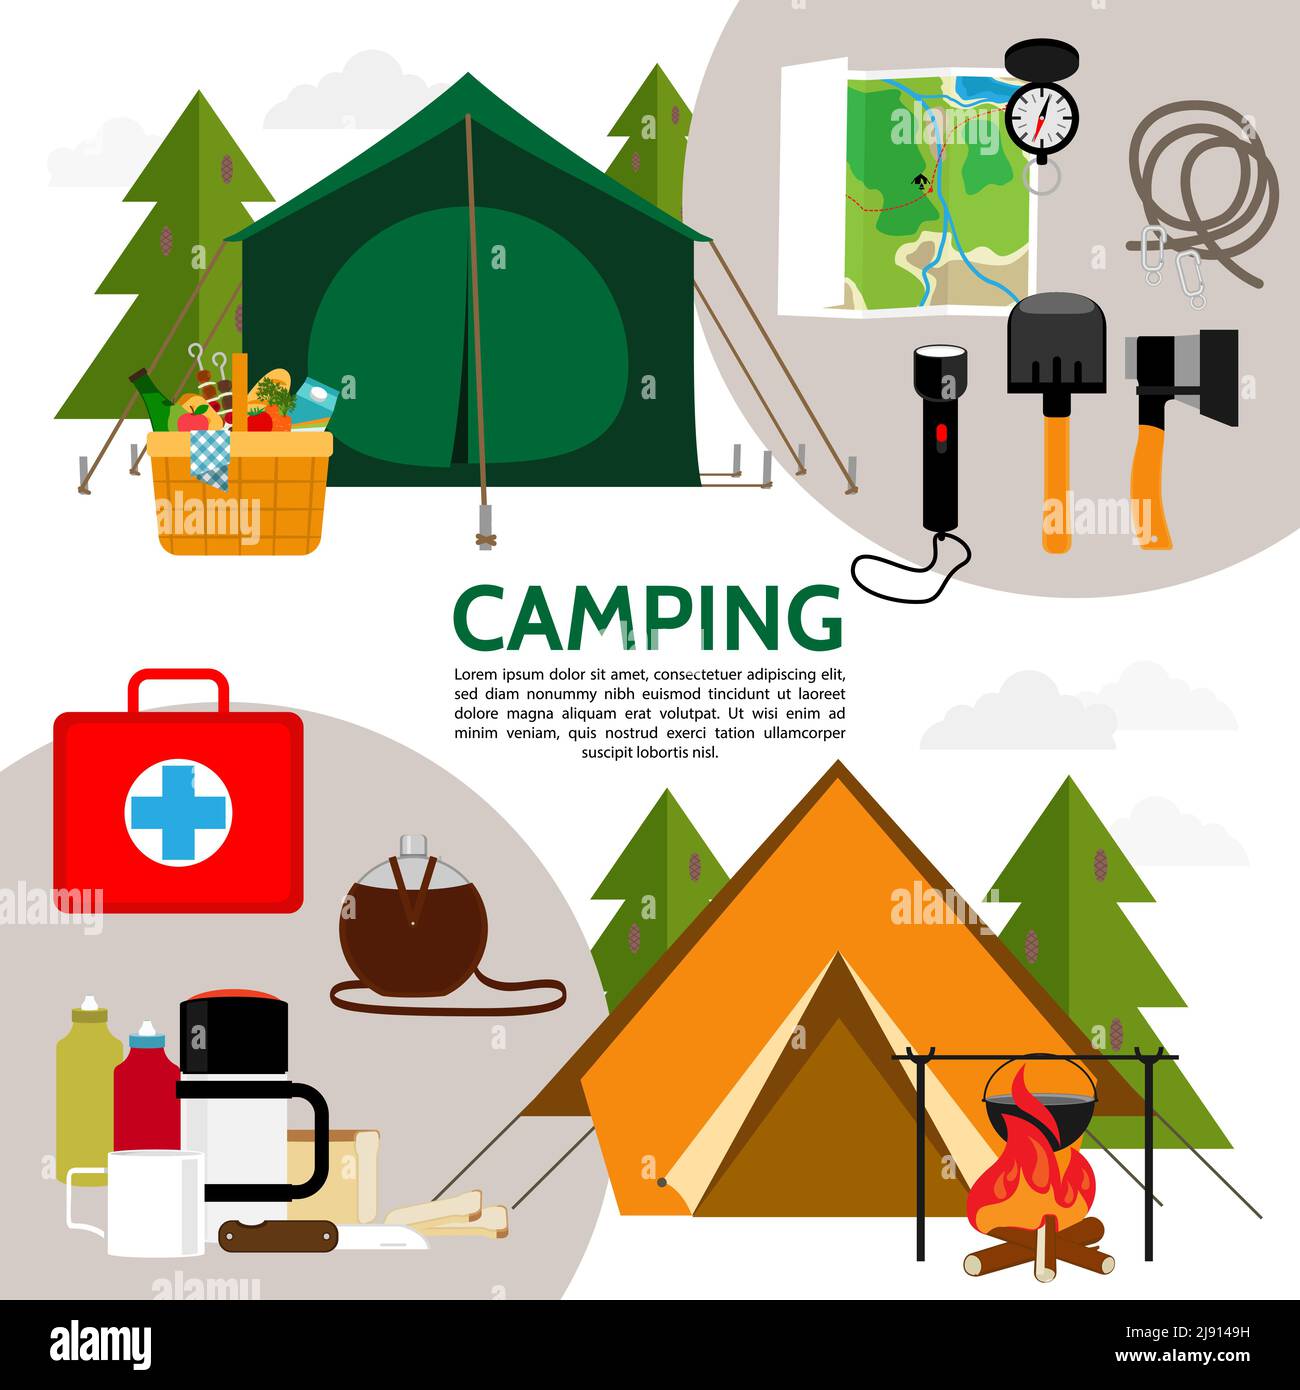 Shovel axe and rope camping necessities kit Vector Image